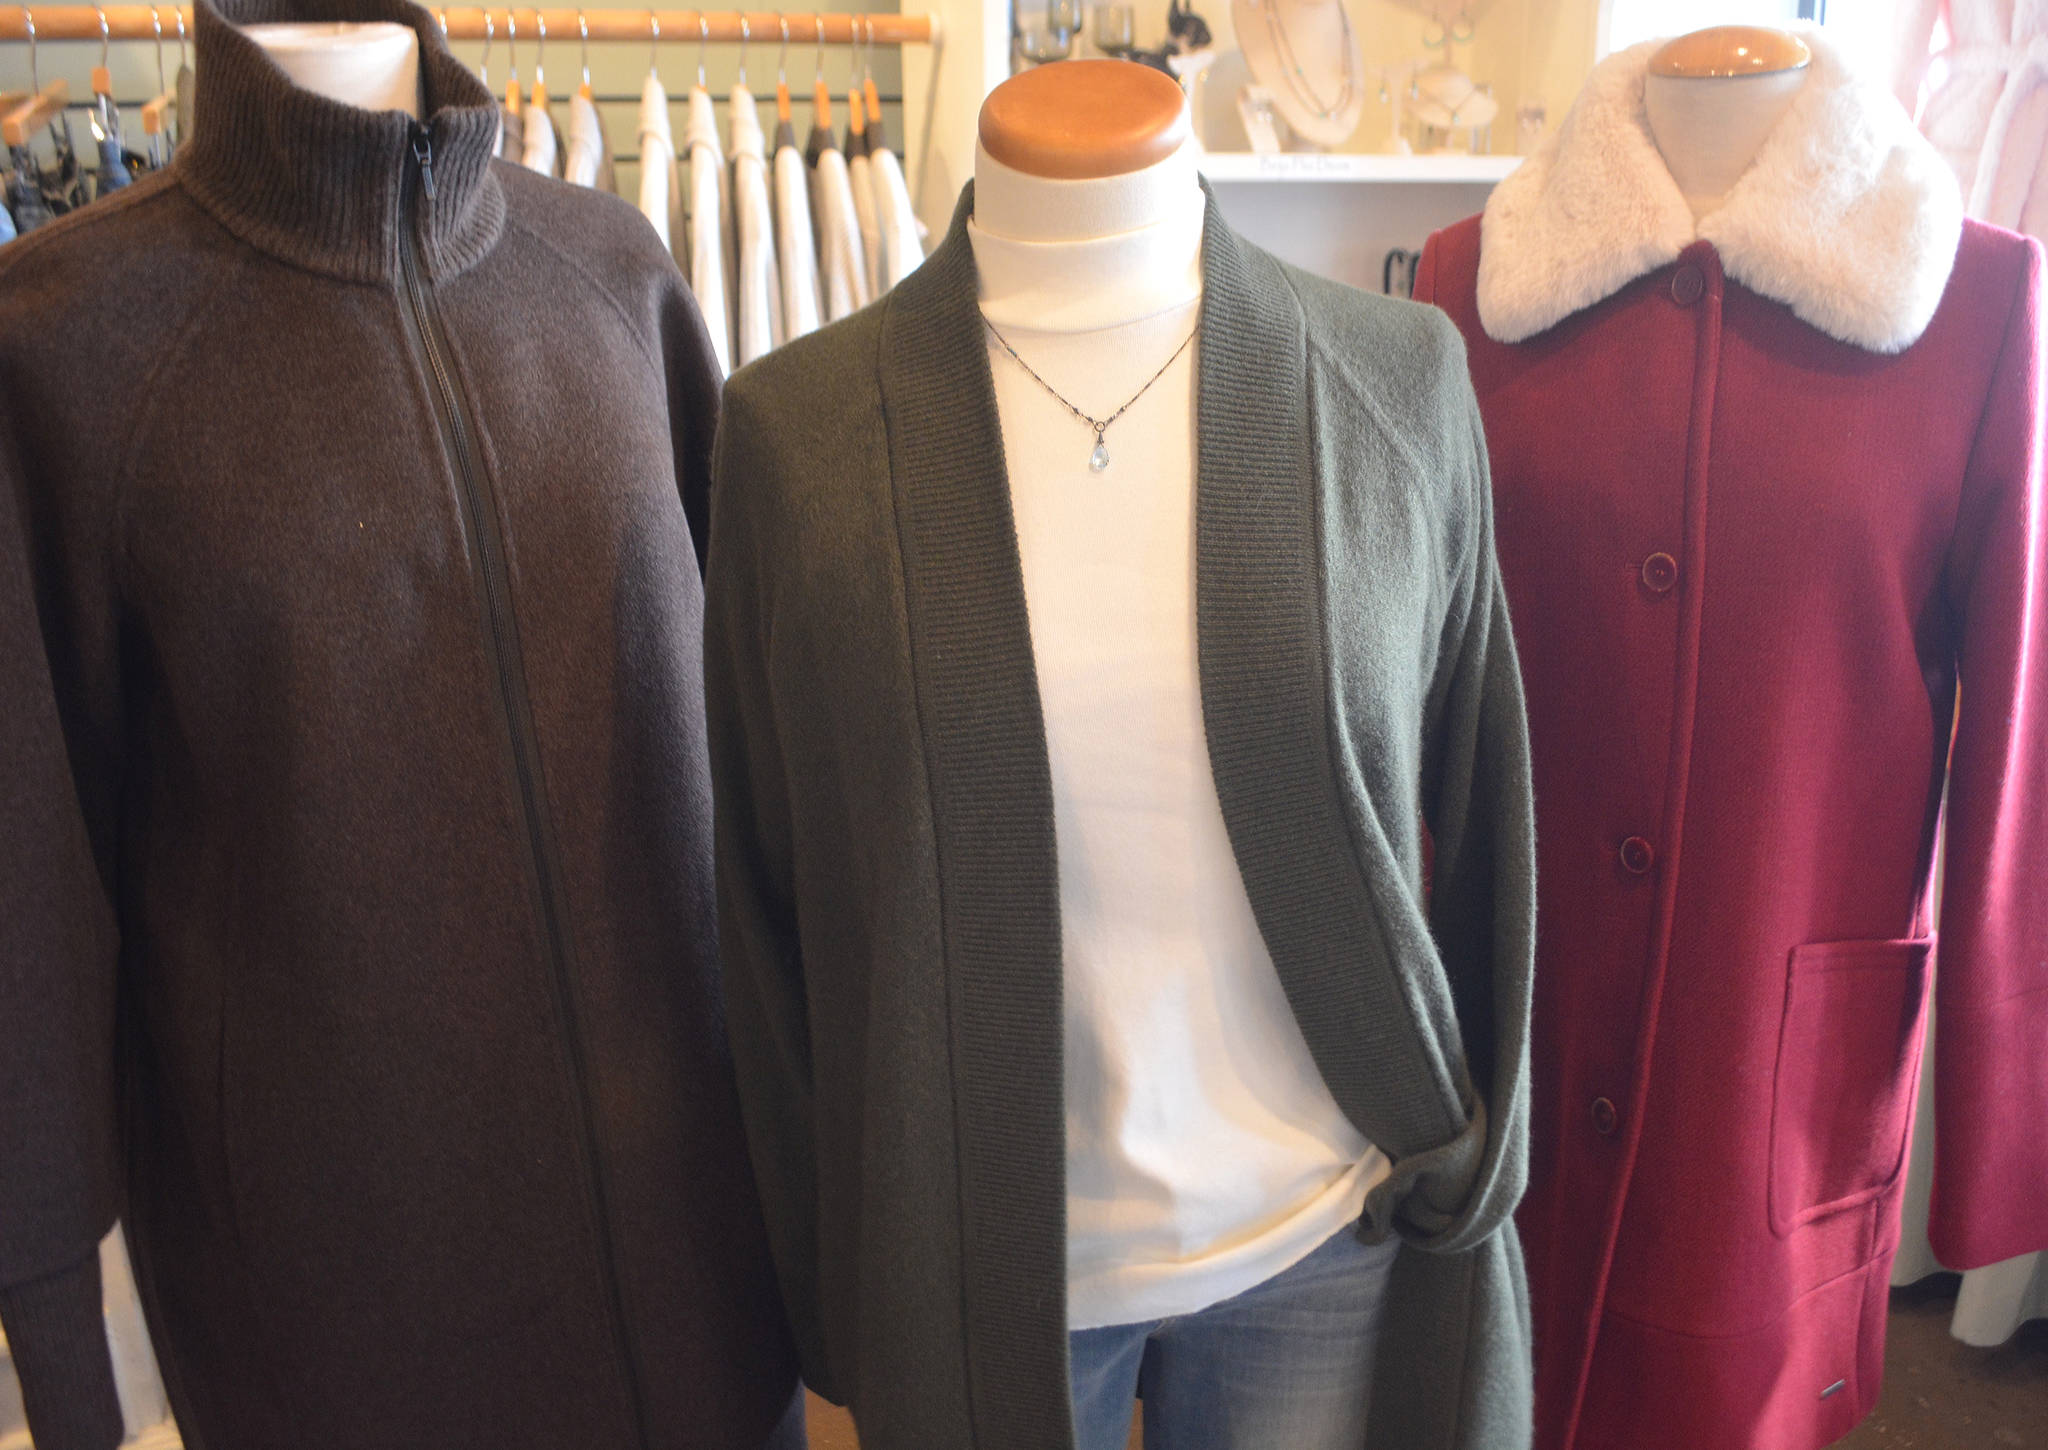 Upscale coats like these sell for anywhere from $60 to $600 at Skookum Clothing NW.